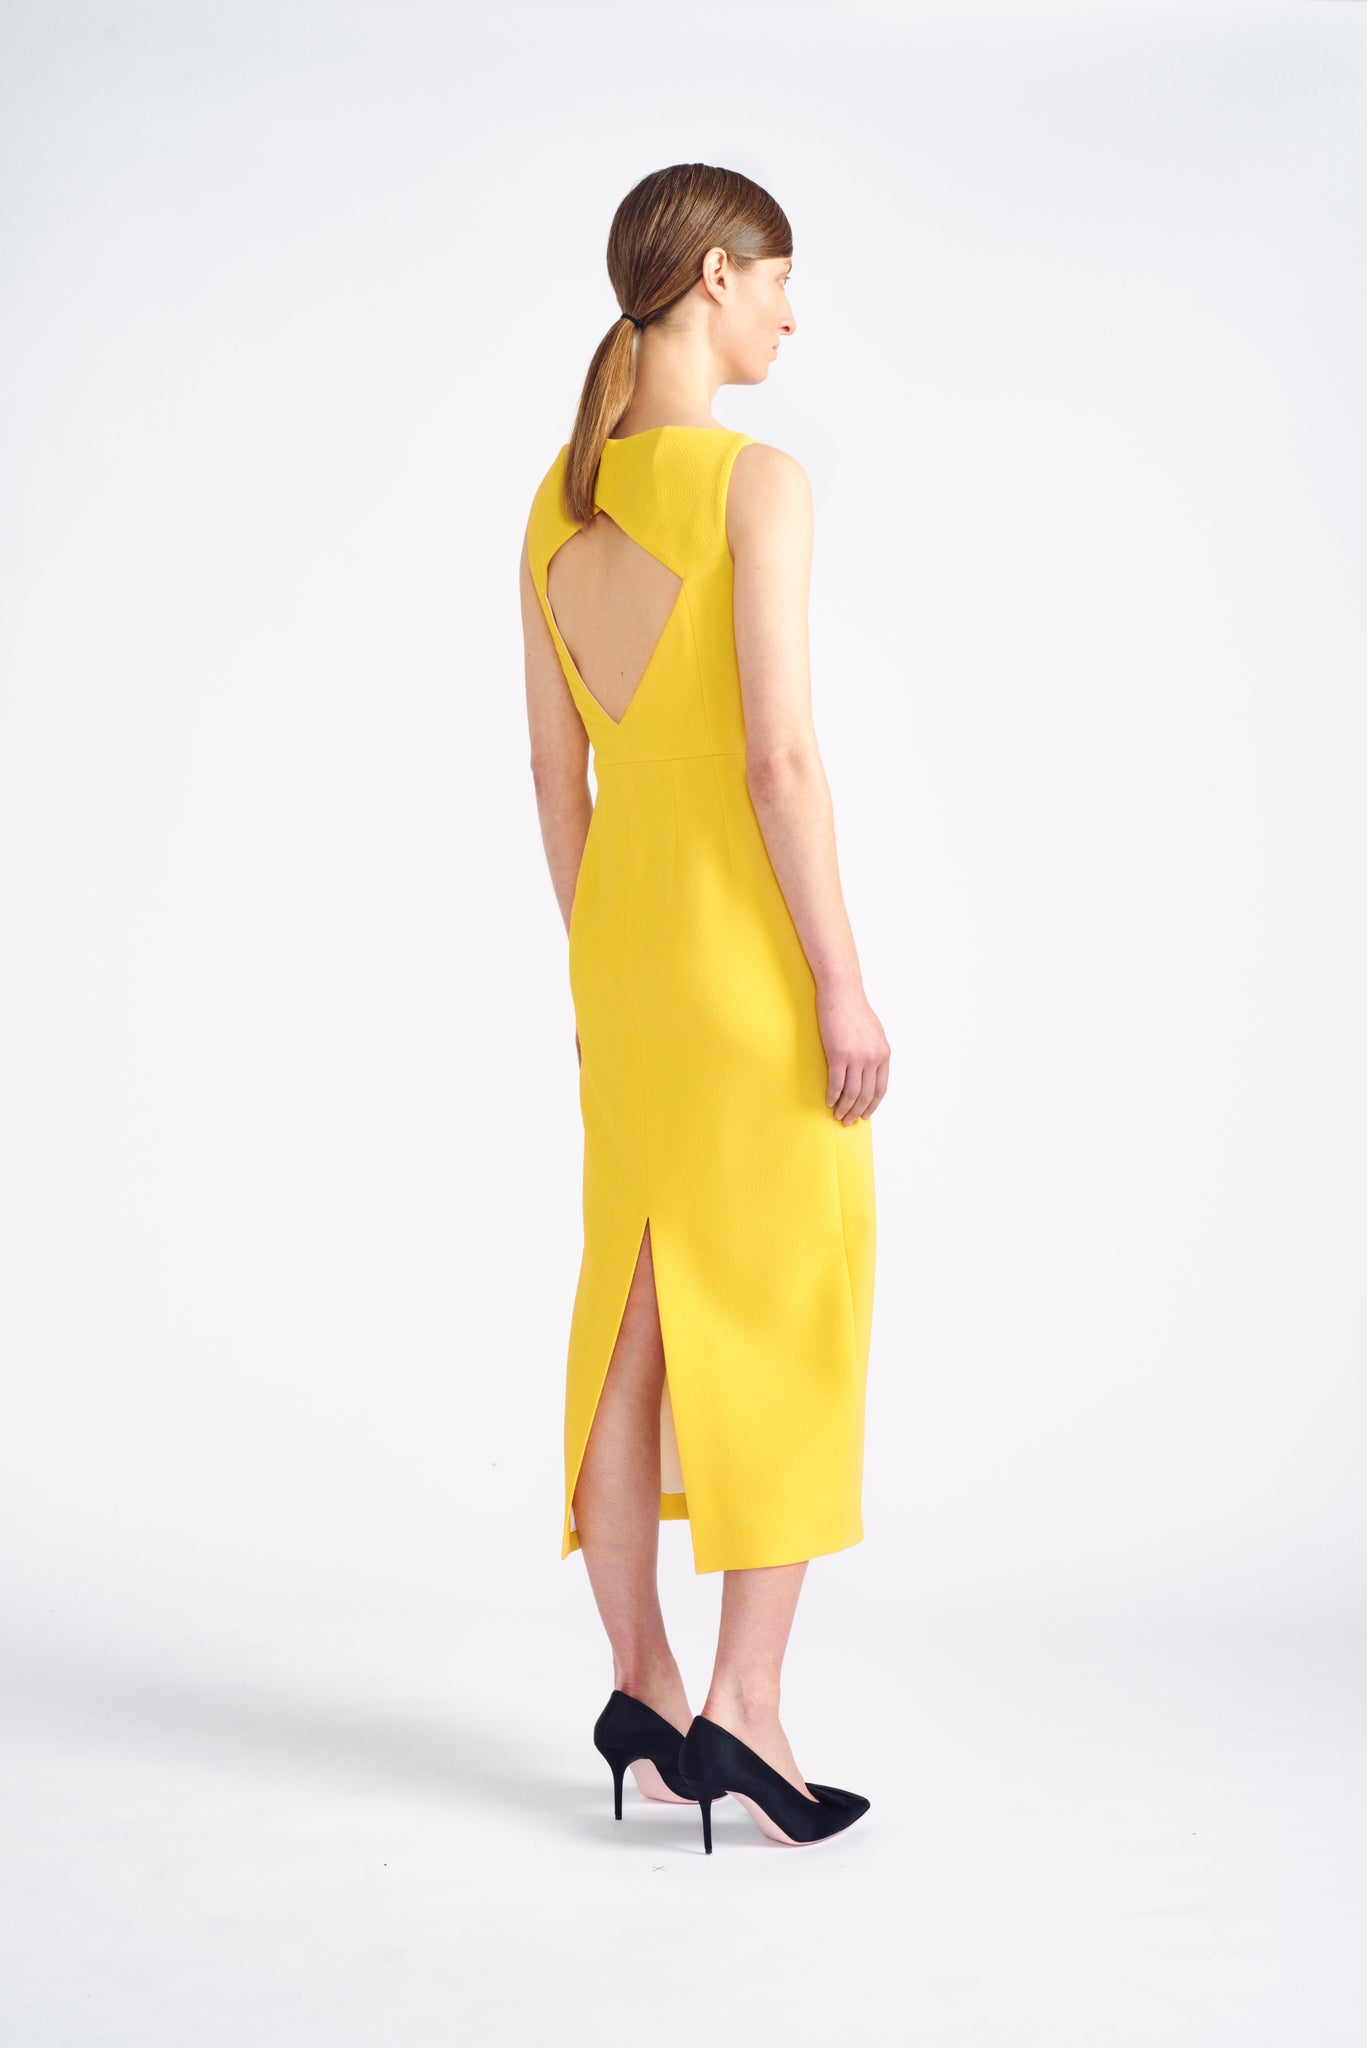 Cleo Dress | Yellow Tailored Pencil Dress with Cutout Back | Emilia Wickstead